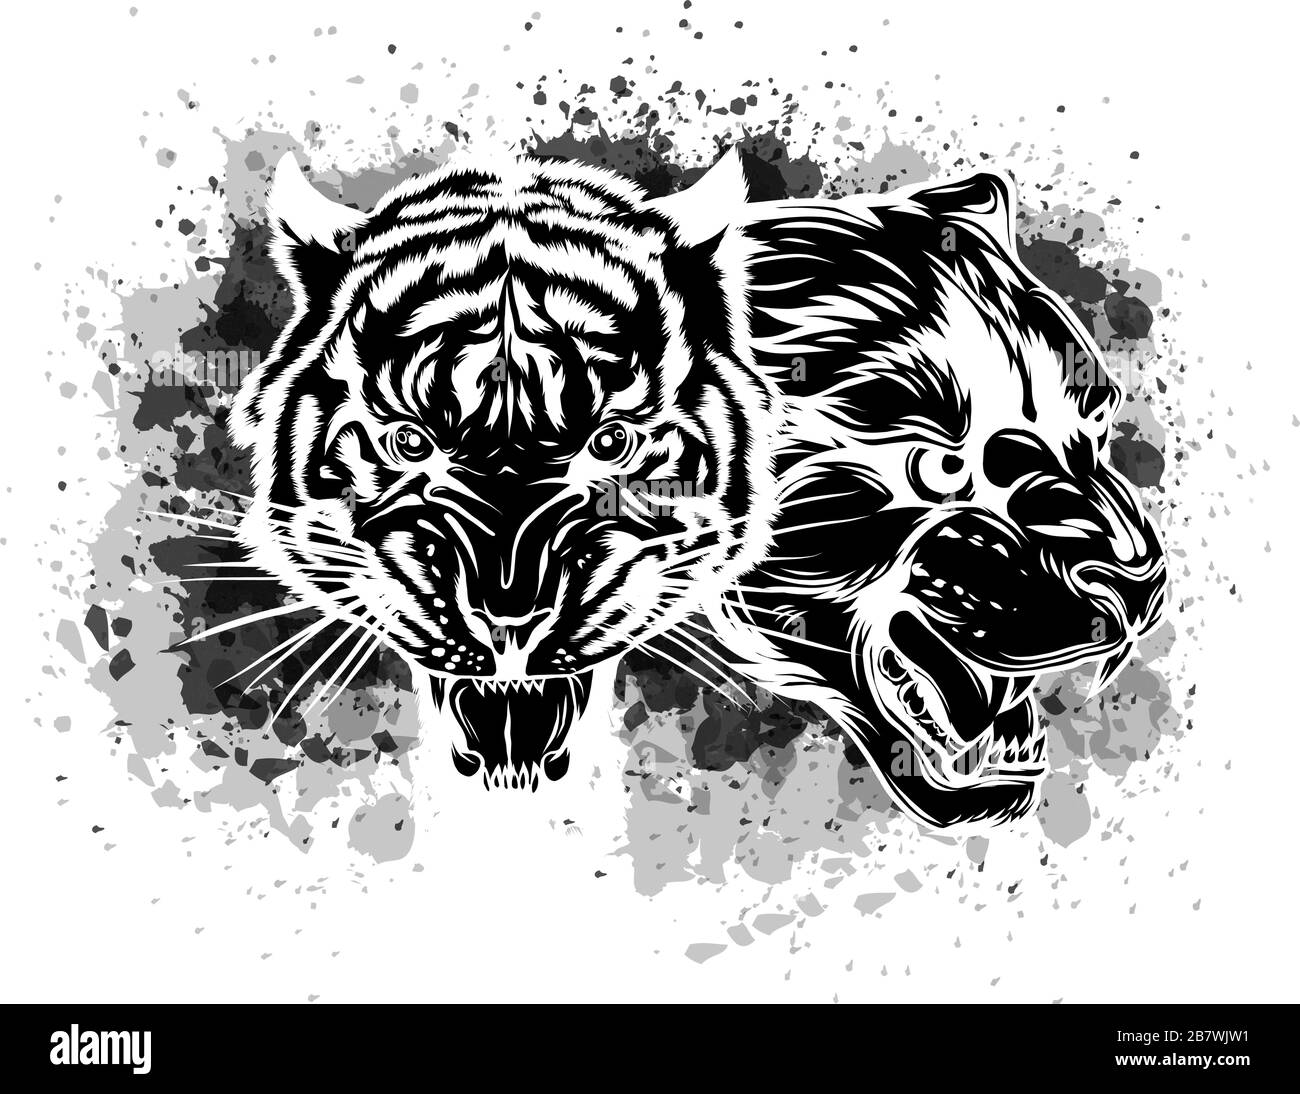 Combined faces of lion and tiger. vector illustration Stock Vector